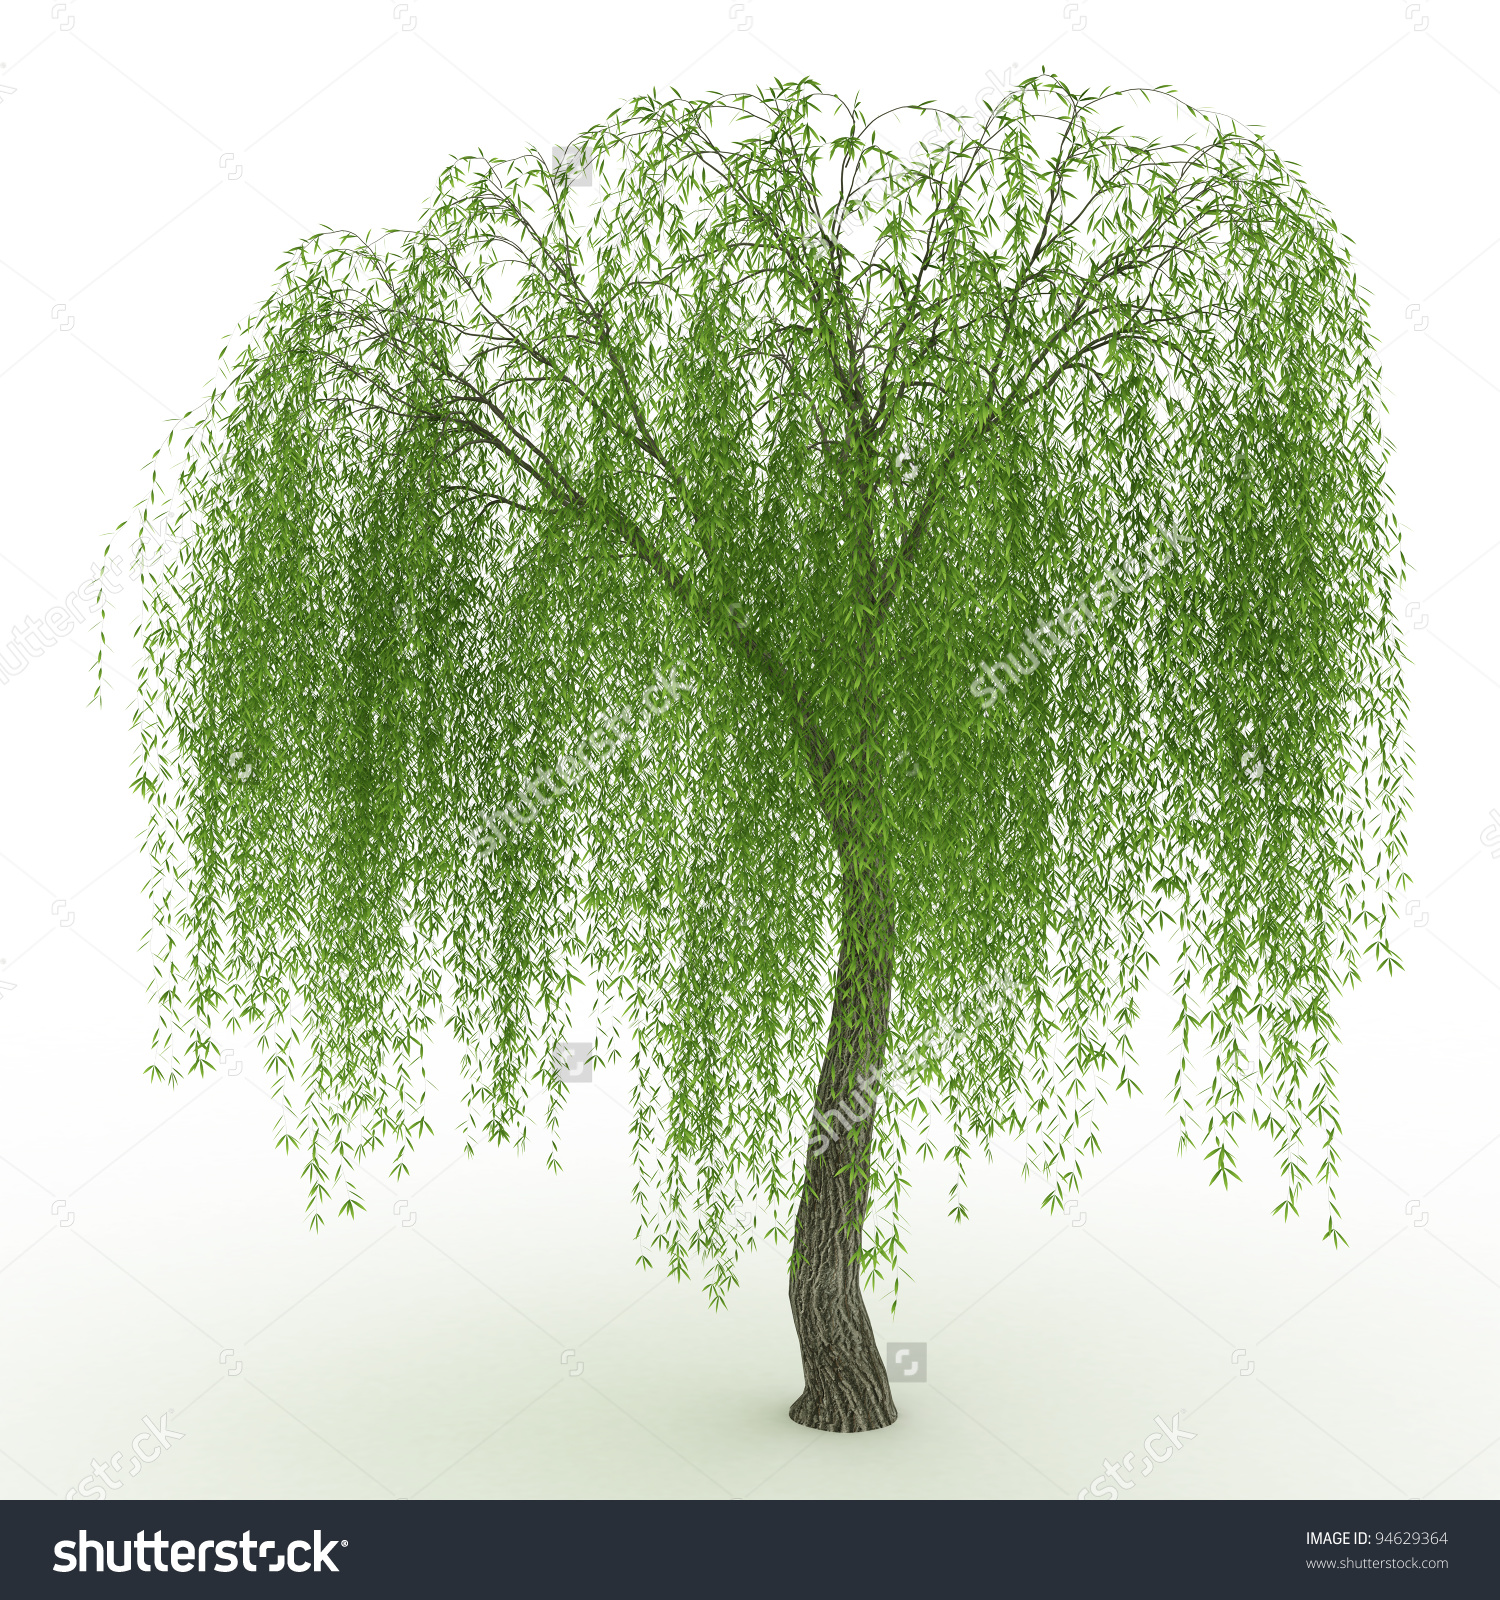 willow tree clip art images - photo #14